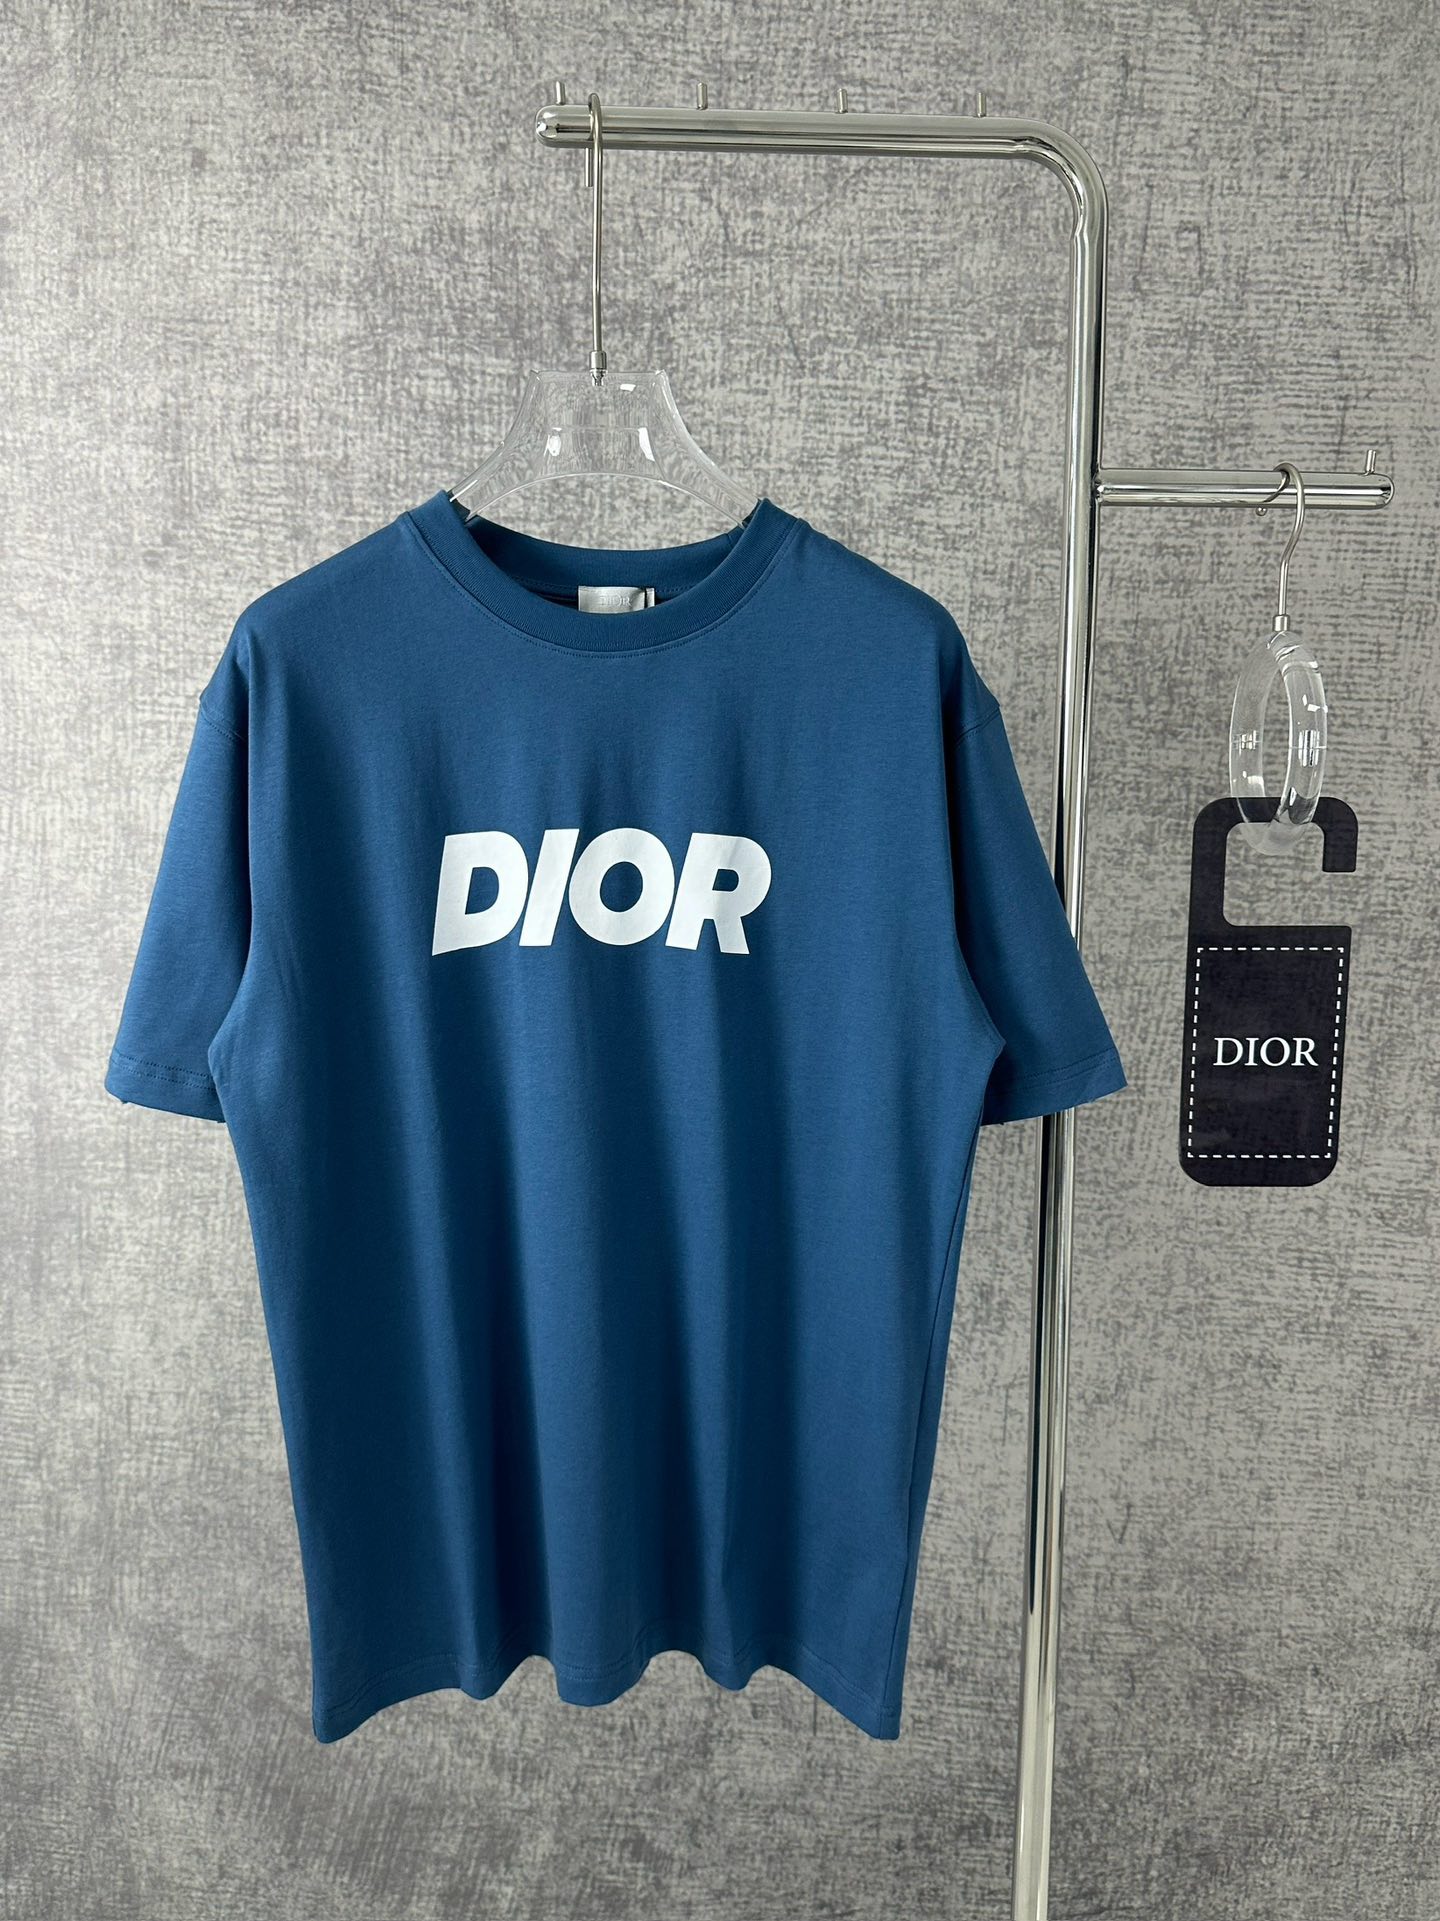 Dior Clothing T-Shirt Black Blue Printing Unisex Cotton Knitting Summer Collection Short Sleeve